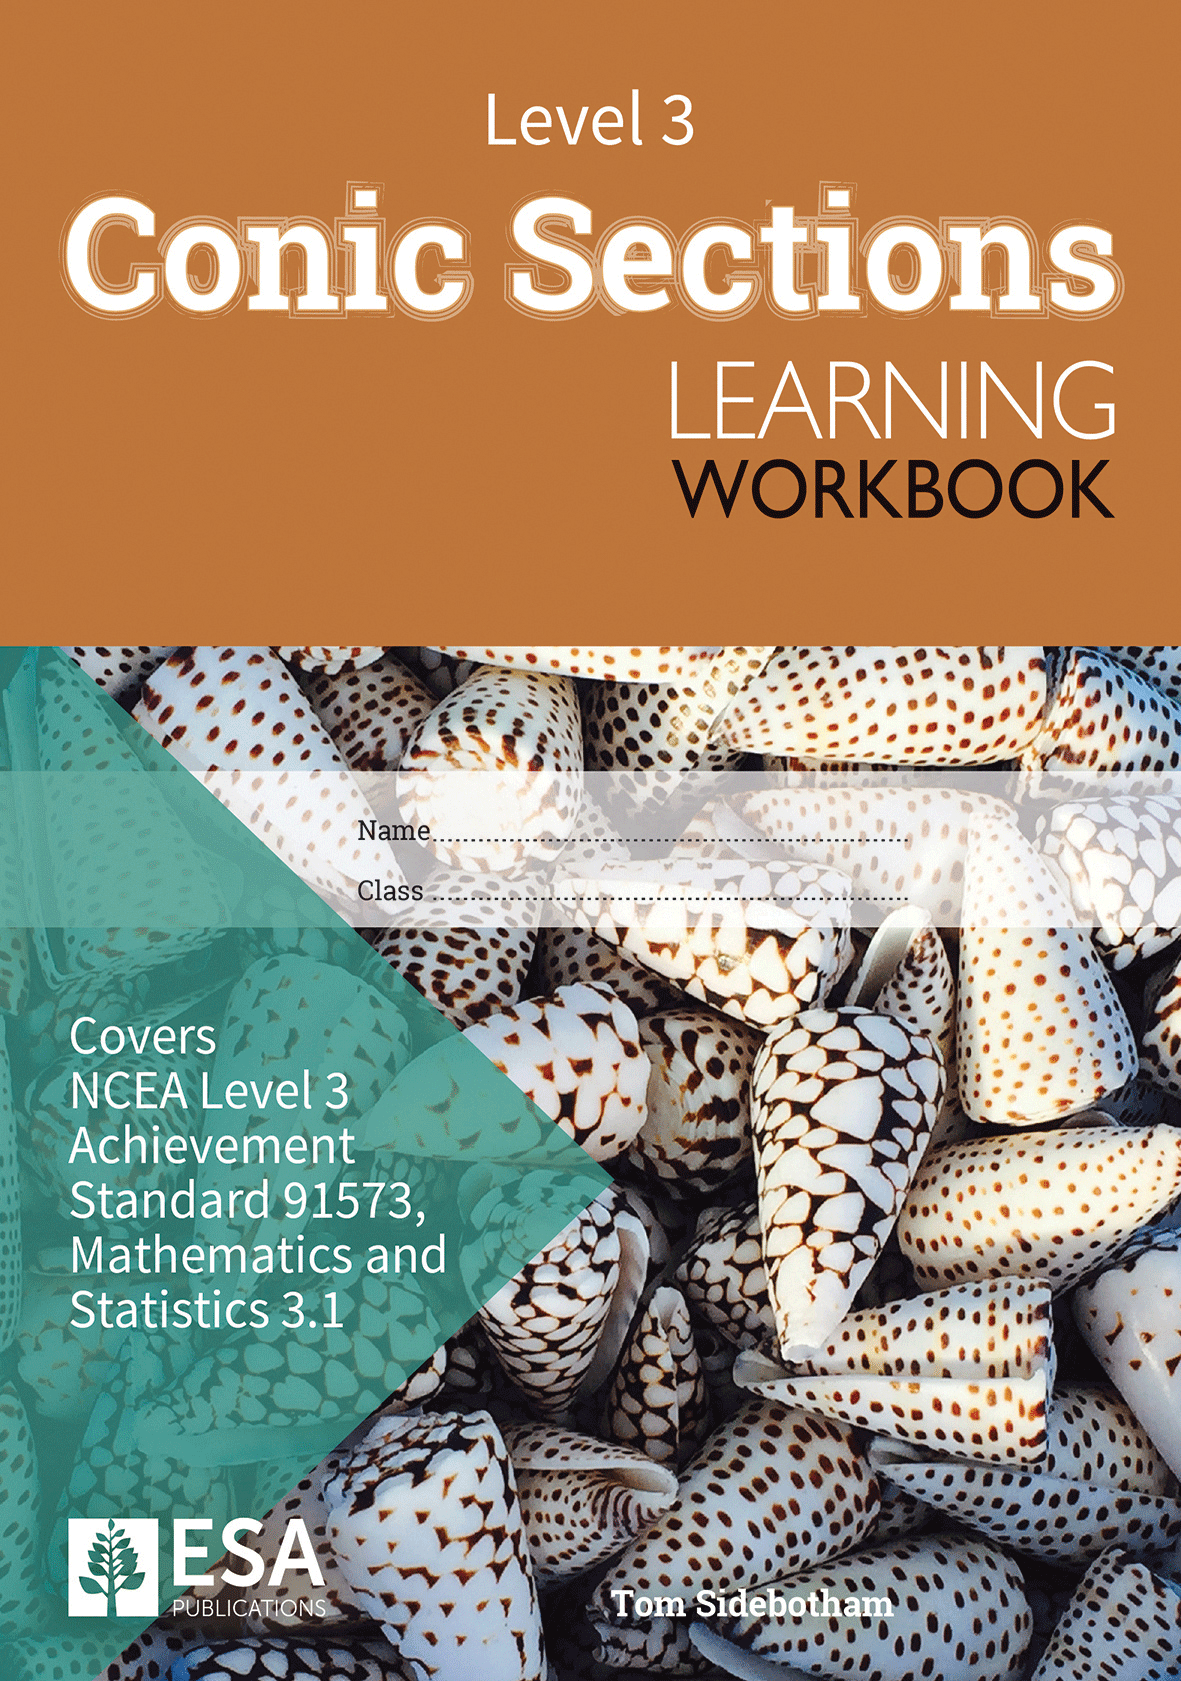 Level 3 Conic Sections 3.1 Learning Workbook